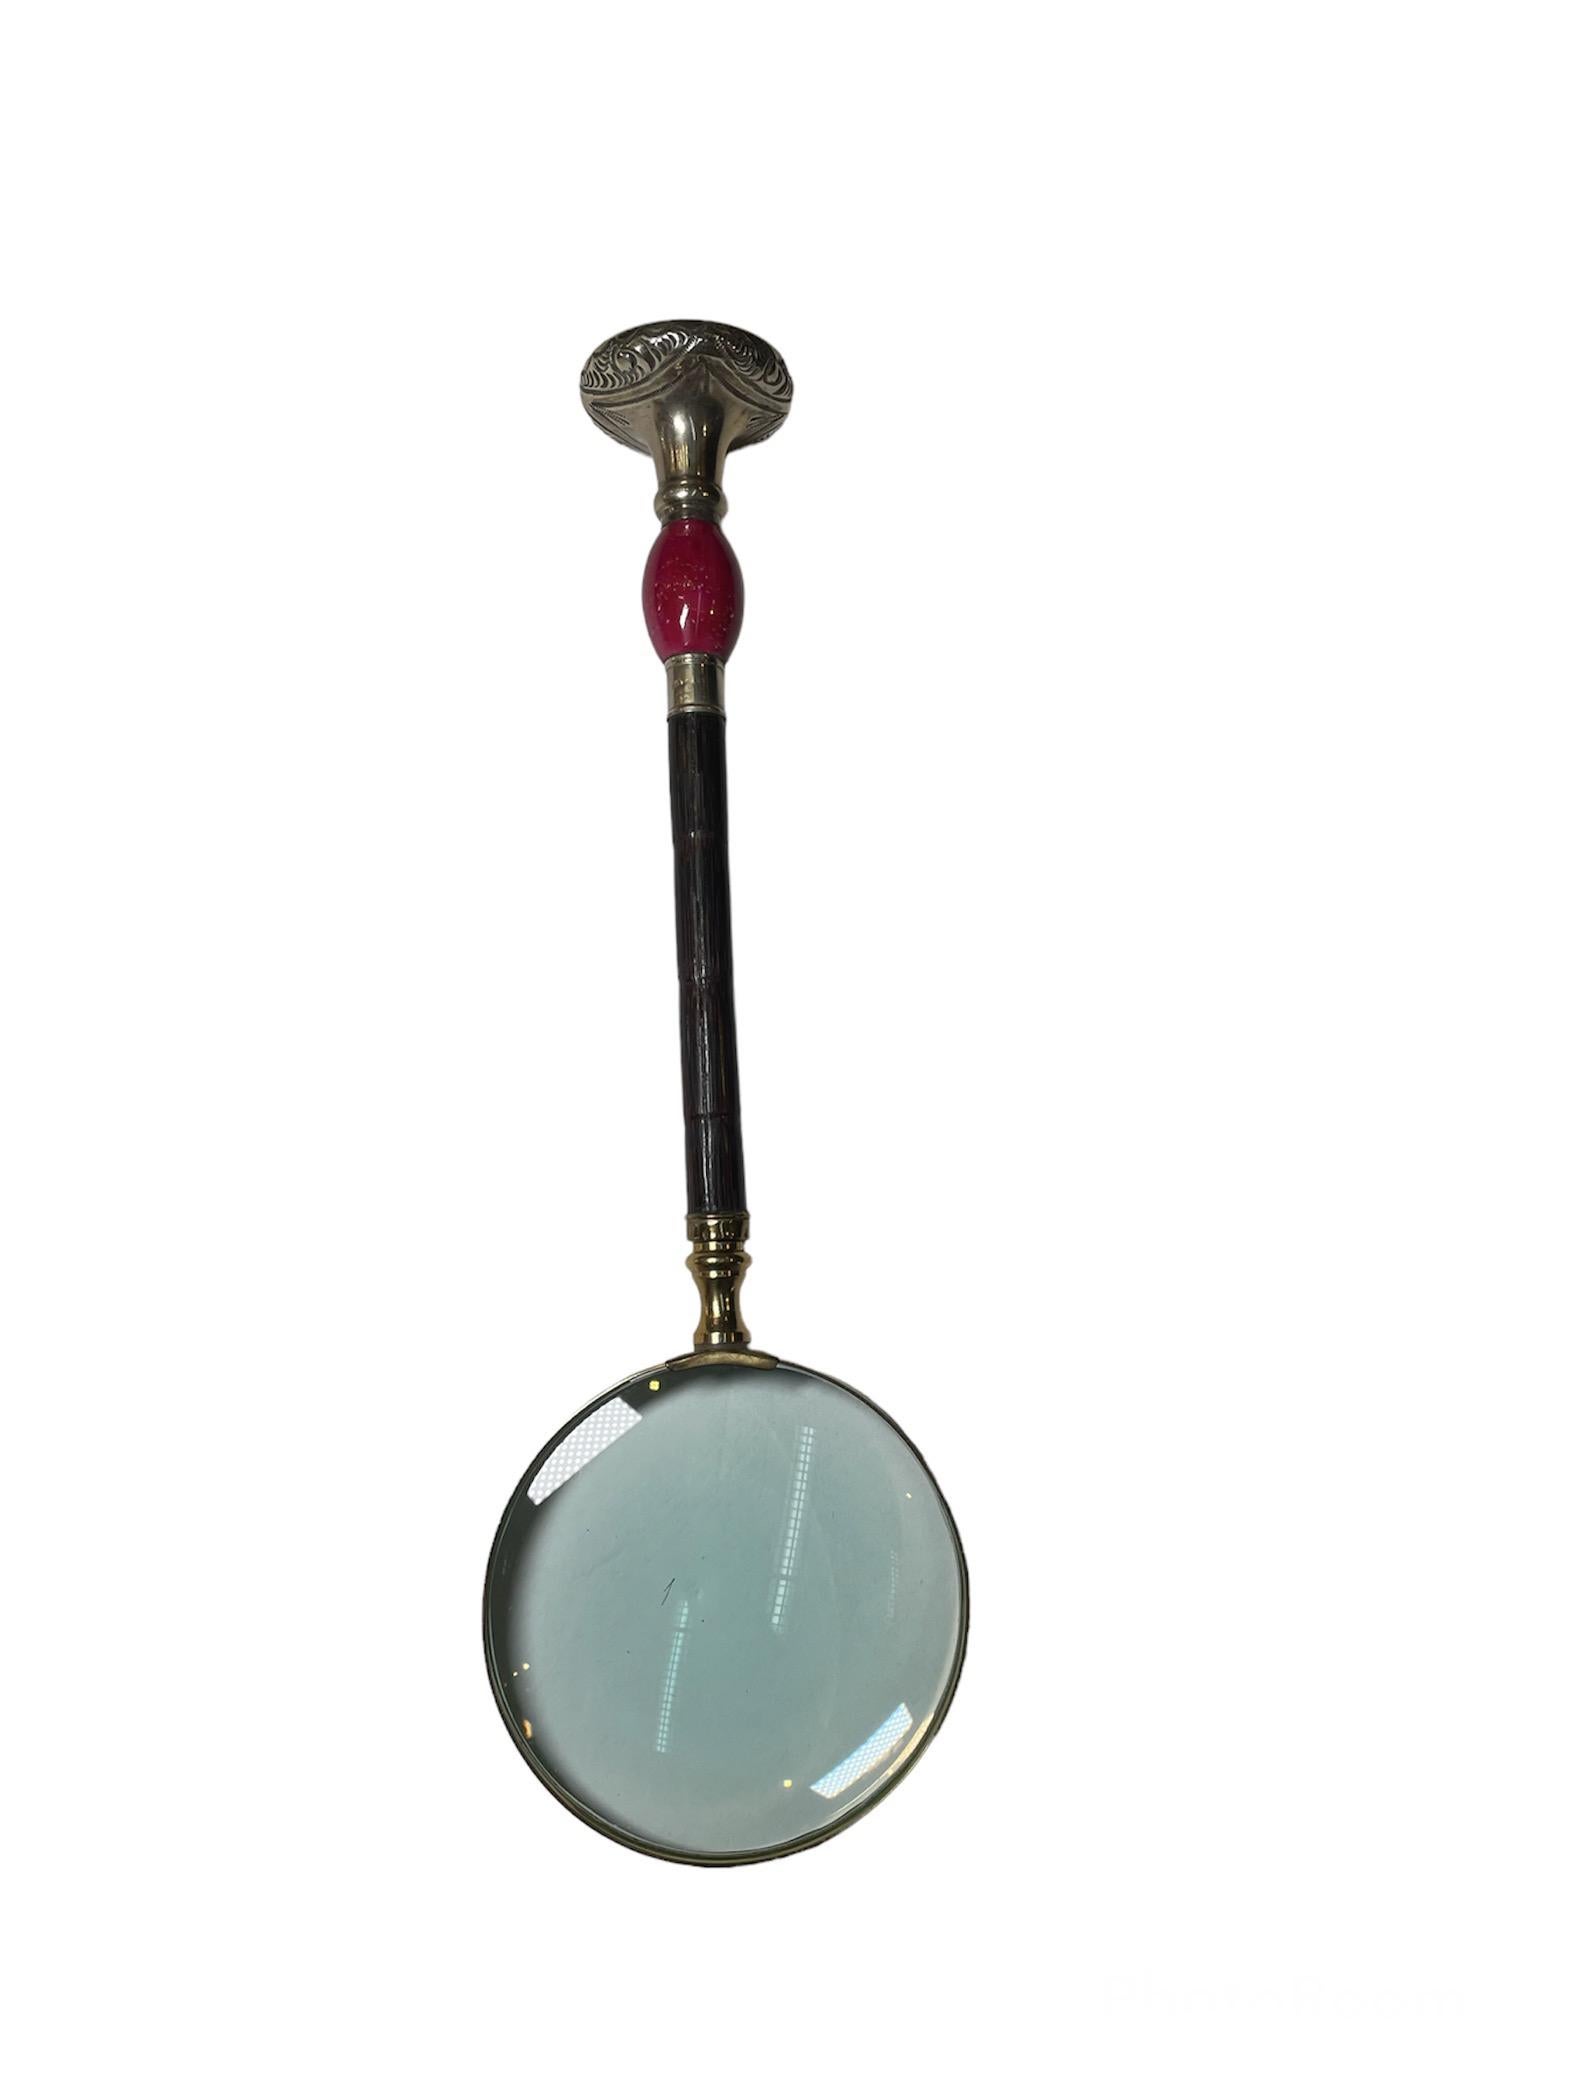 Victorian Style Magnifying Glass In Good Condition For Sale In Guaynabo, PR